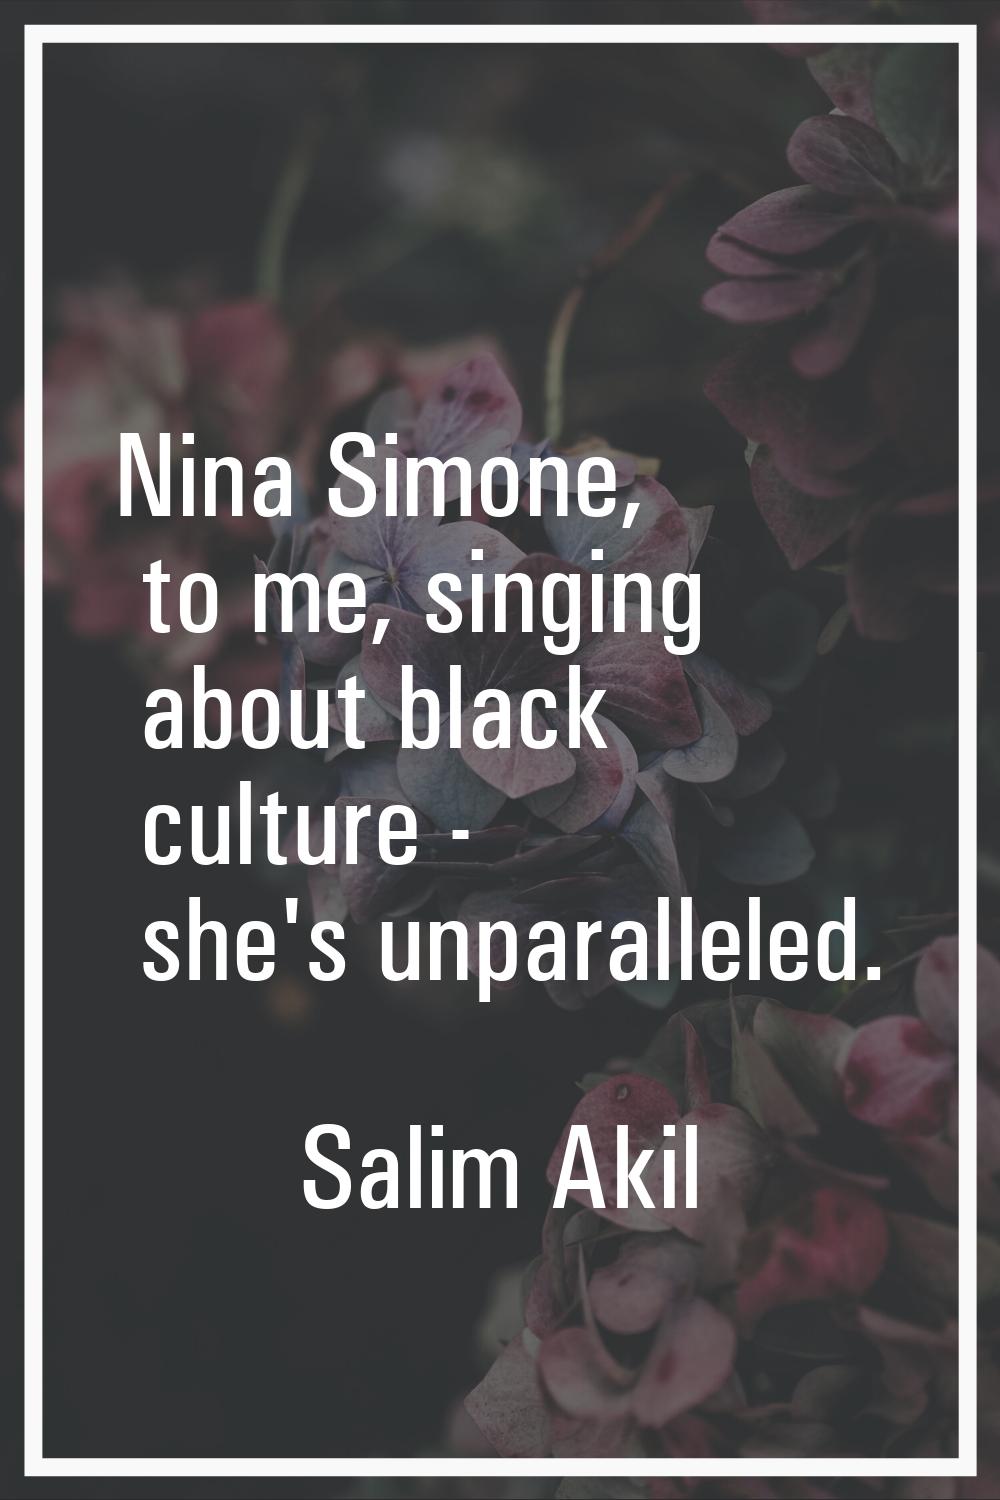 Nina Simone, to me, singing about black culture - she's unparalleled.